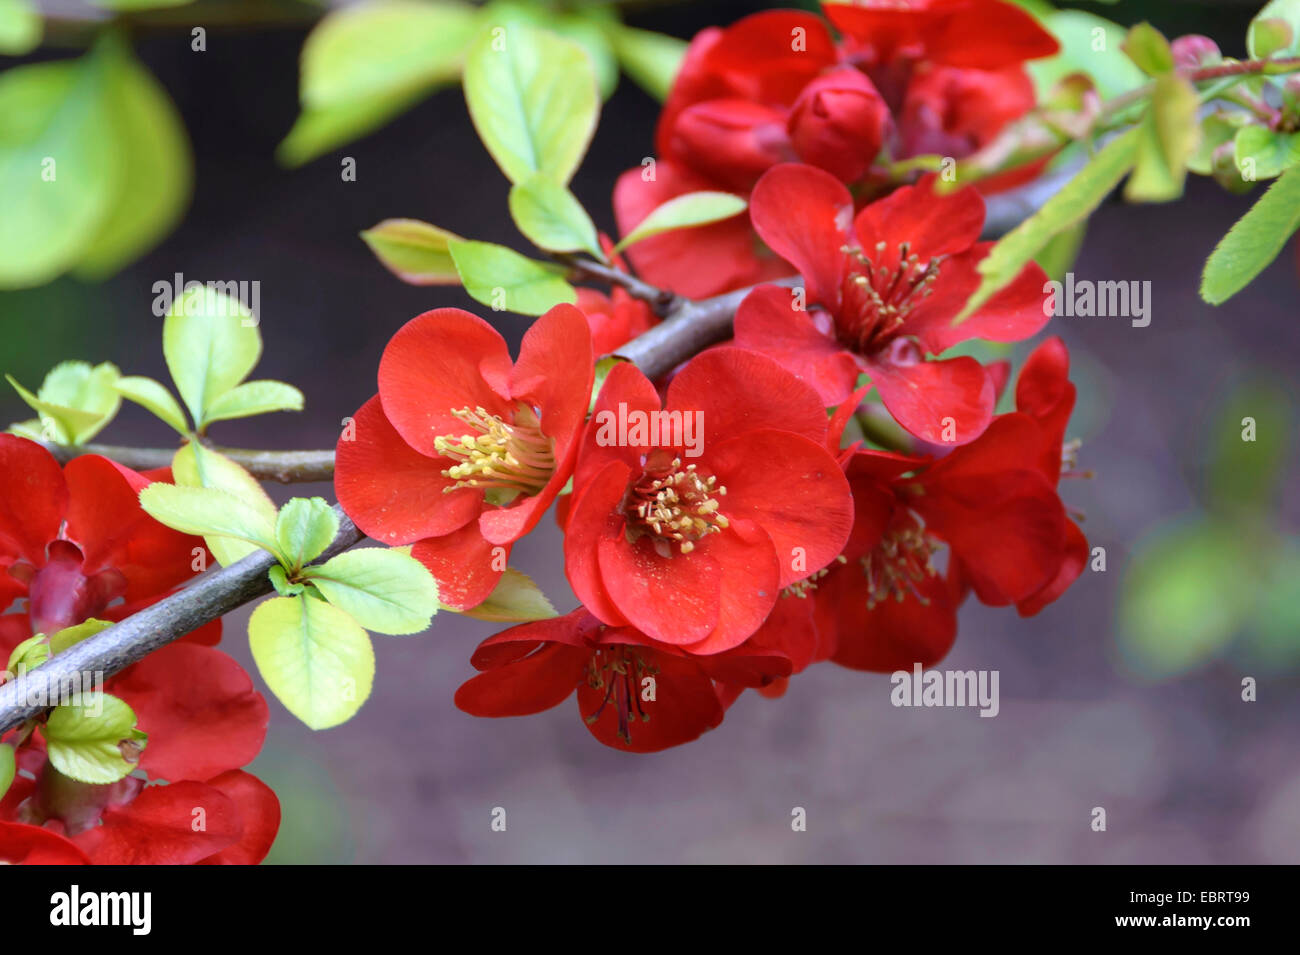 Ornamental quince, Chinese Flowering Quince (Chaenomeles speciosa 'Simonii', Chaenomeles speciosa Simonii), cultivar Simonii, Germany, Bavaria Stock Photo